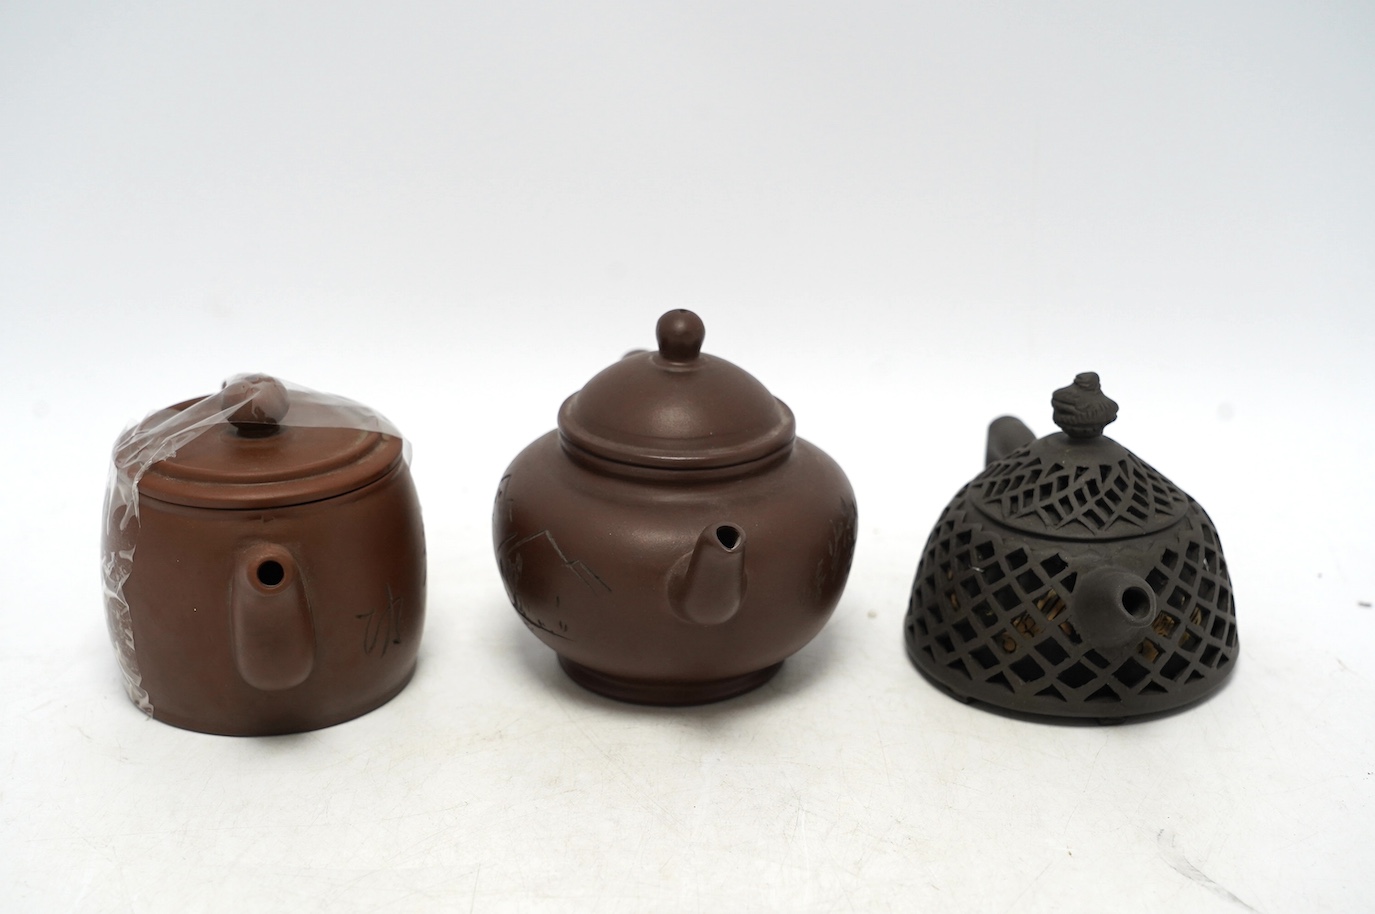 Three Yixing teapots, one double walled lattice worked body, tallest 11cm. Condition - good